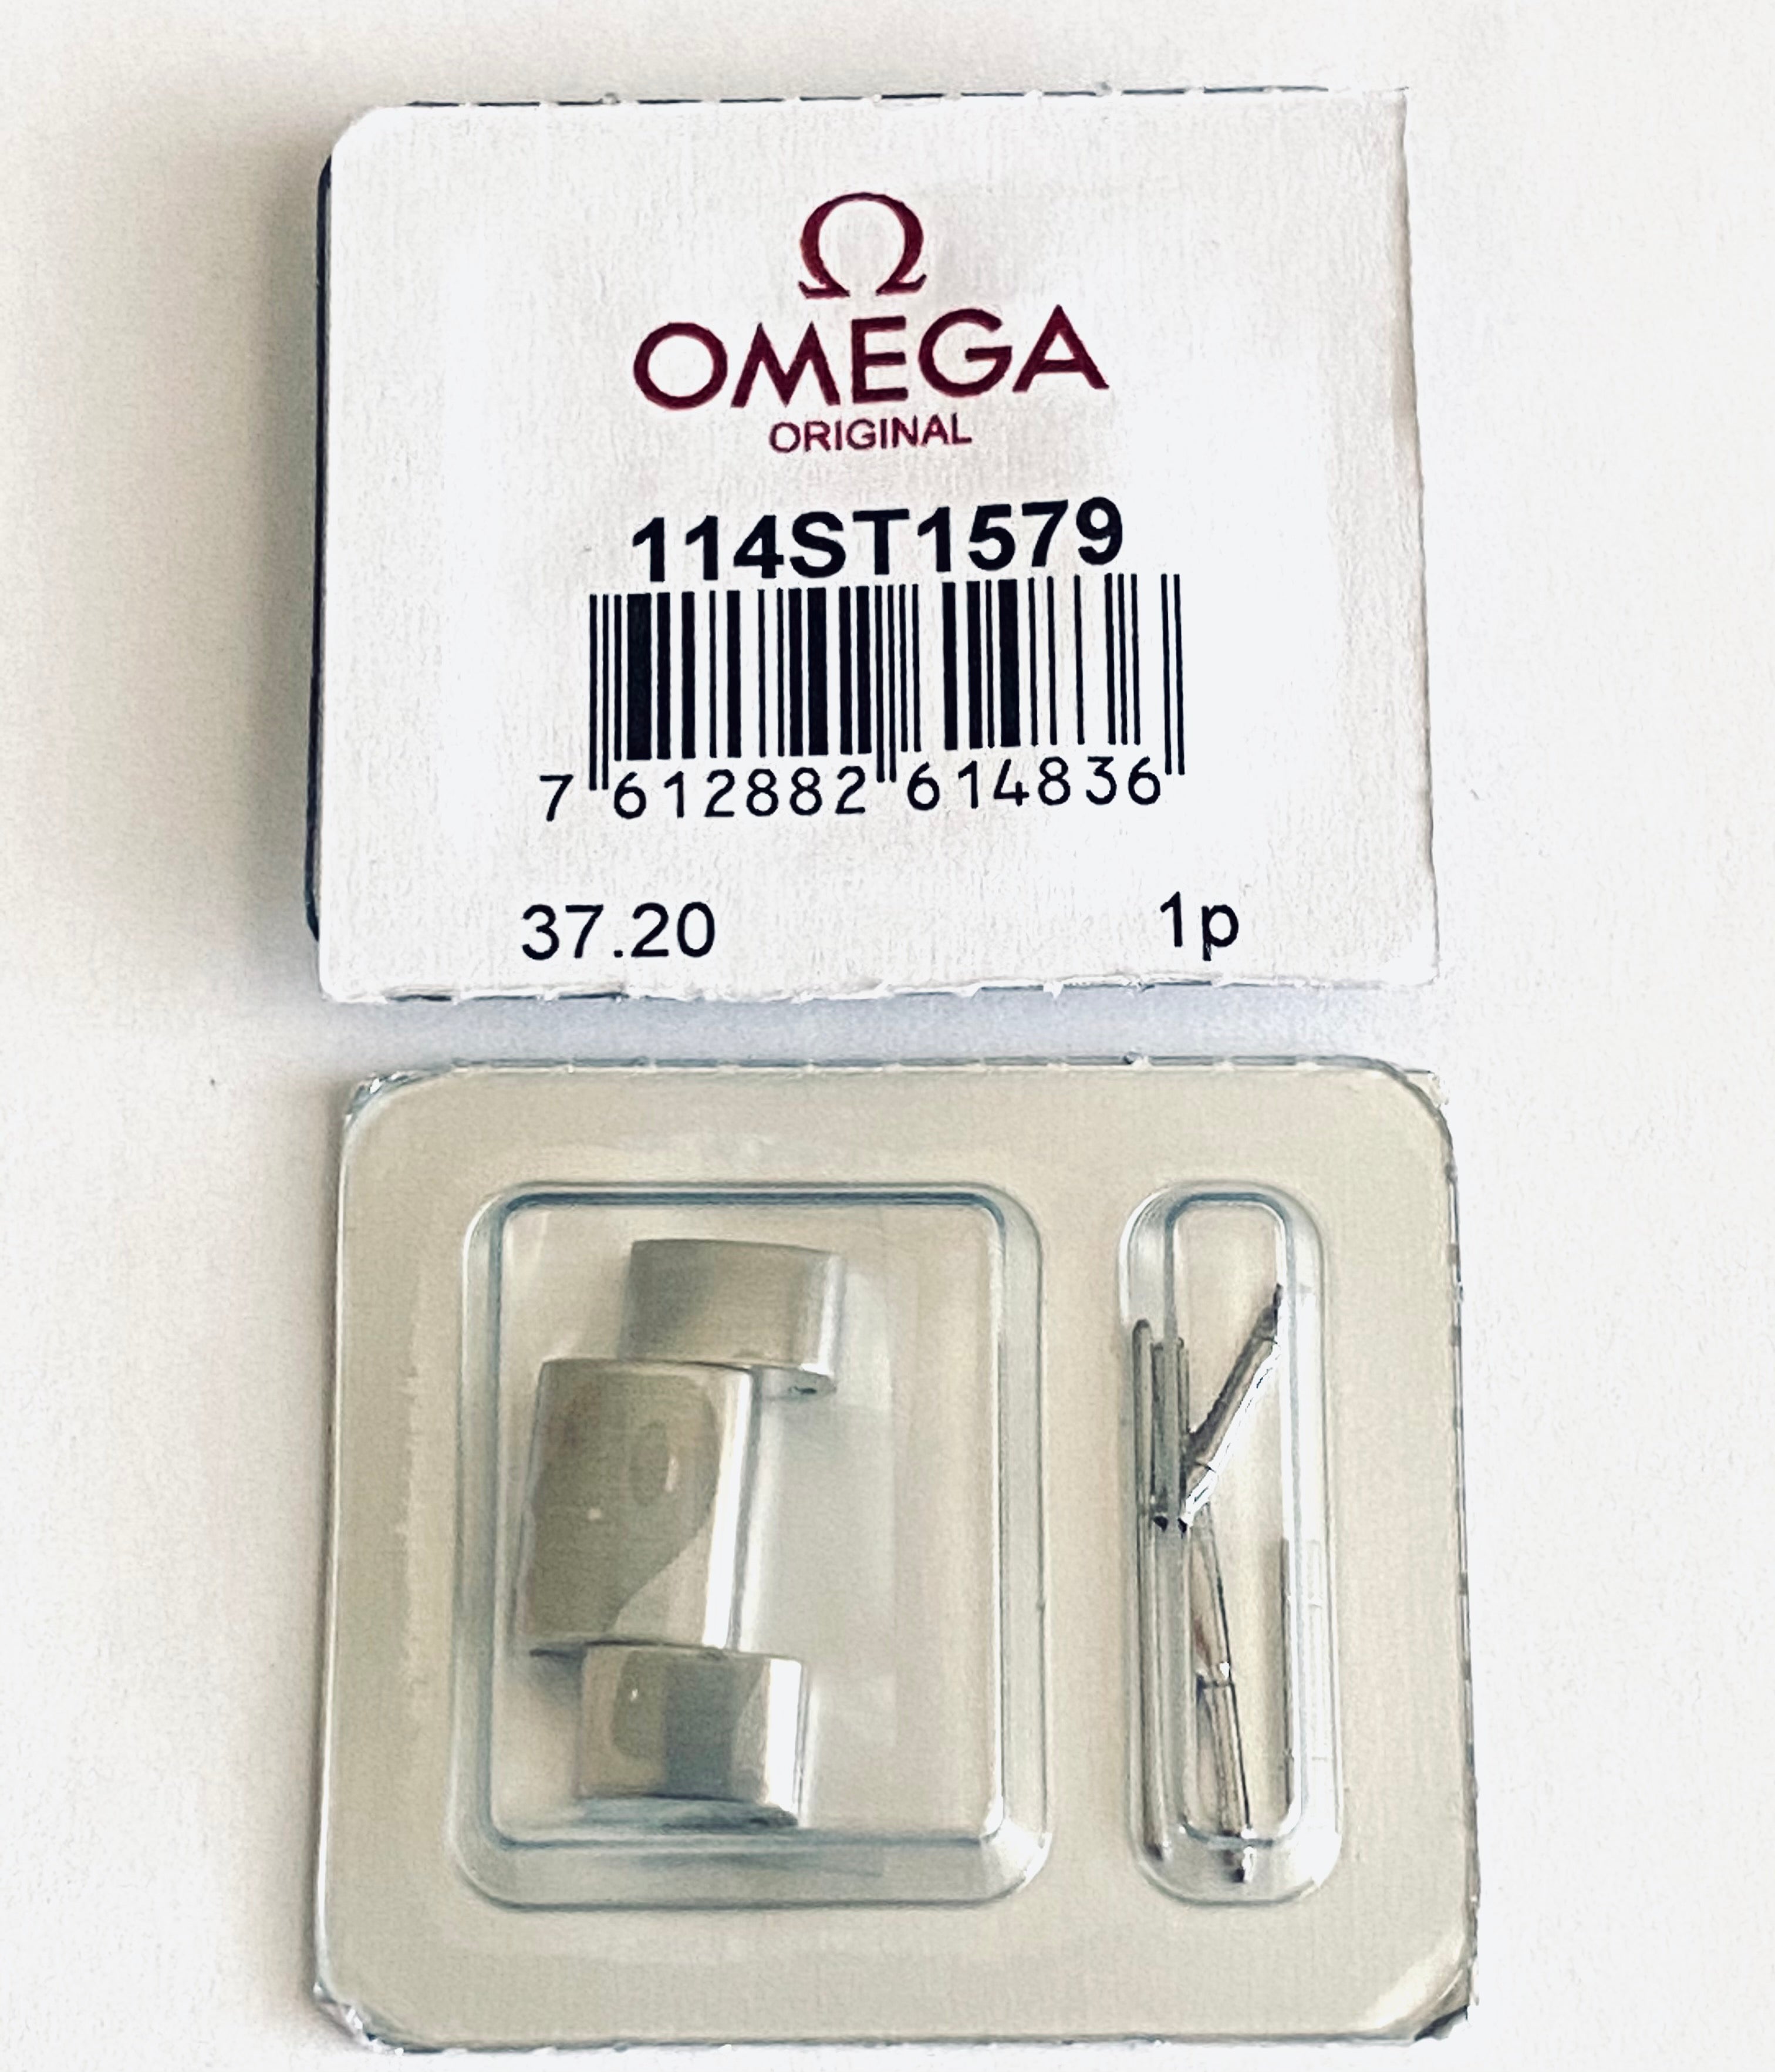 Omega 1611 BAND BRACELET ST 396.0839 ALBATROS SEAMASTER... for Rs.36,457  for sale from a Trusted Seller on Chrono24